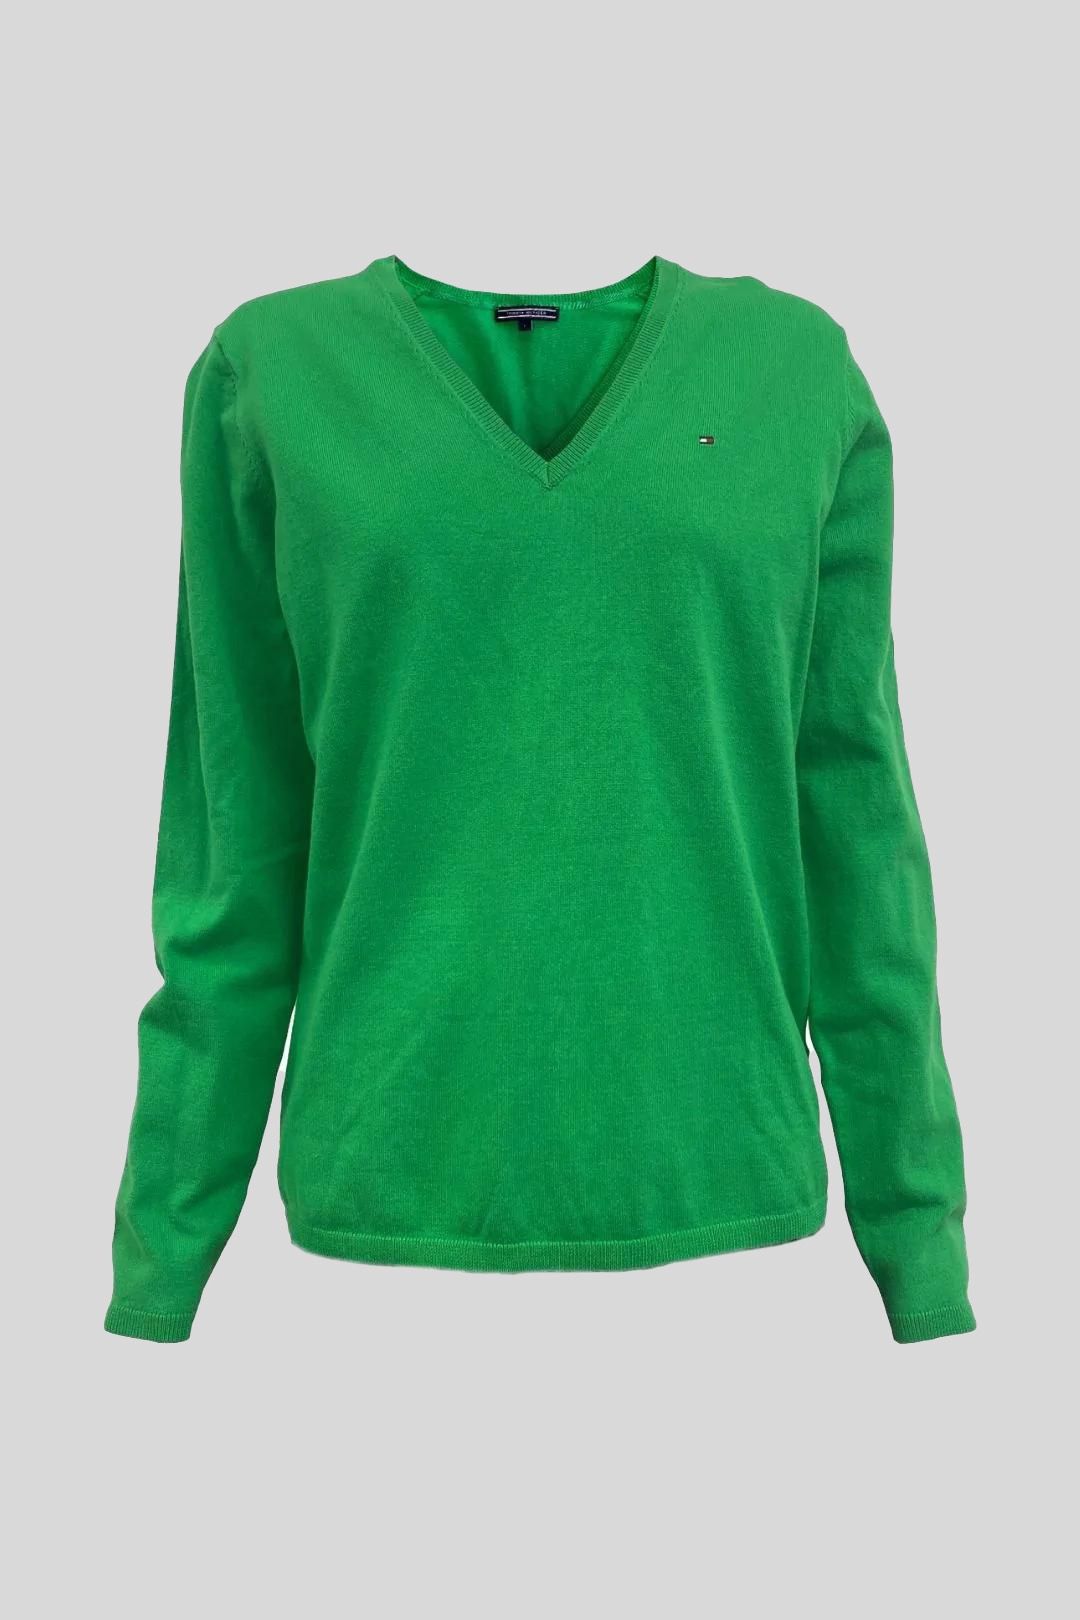 Tommy Hilfiger Classic V Neck Sweater Green